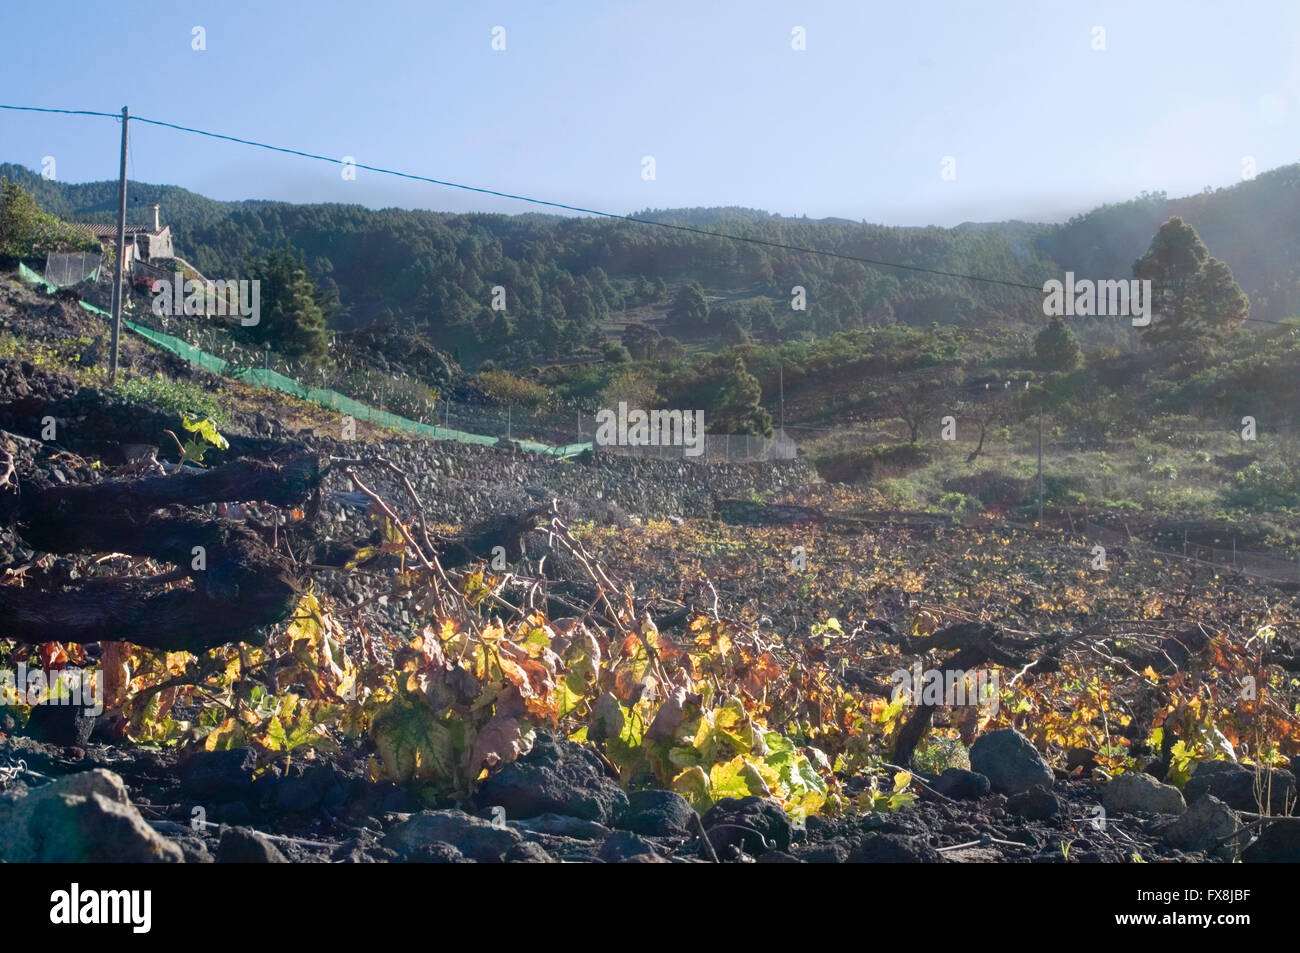 grape vines grape vine grapevine grapevines vineyard vineyards canary islands island canaries isle isles low short on a hill sid Stock Photo